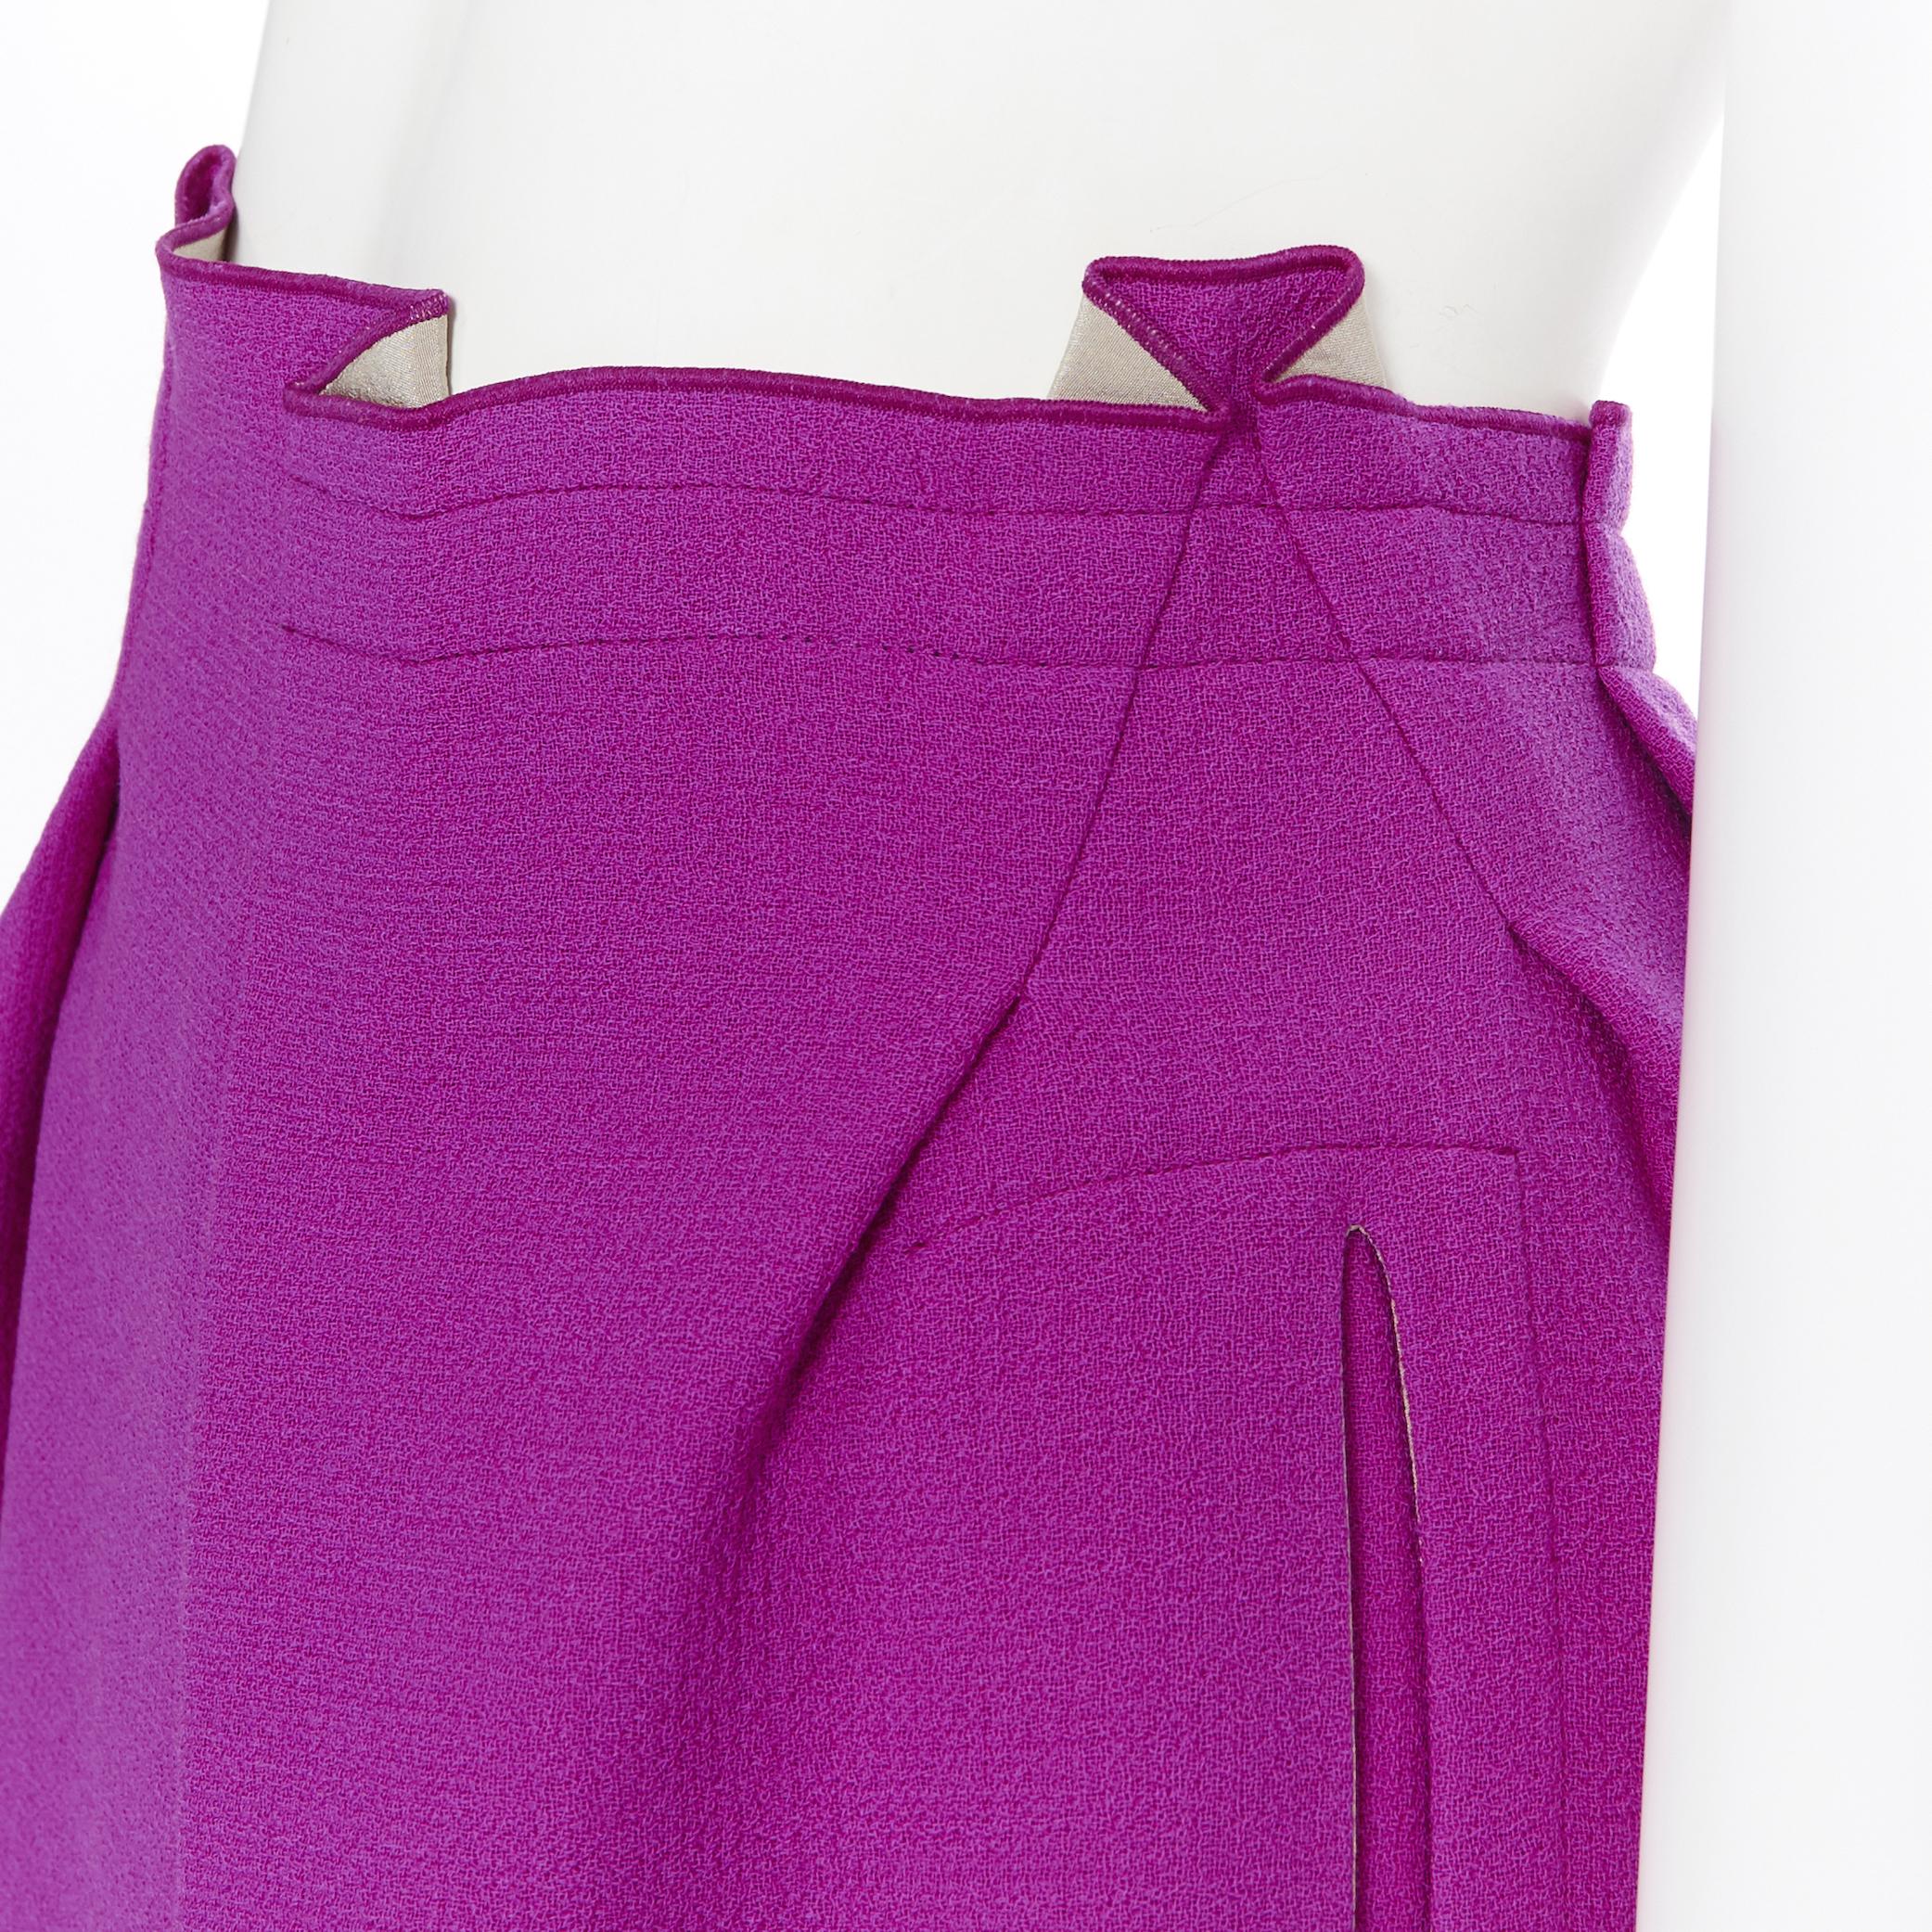 ROLAND MOURET purple wool origami folded pleat A-line skirt UK6 XS
Brand: Roland Mouret
Designer: Roland Mouret
Model Name / Style: A-line skirt
Material: Wool, silk
Color: Purple
Pattern: Solid
Closure: Zip
Extra Detail: Origami pleating at waist.